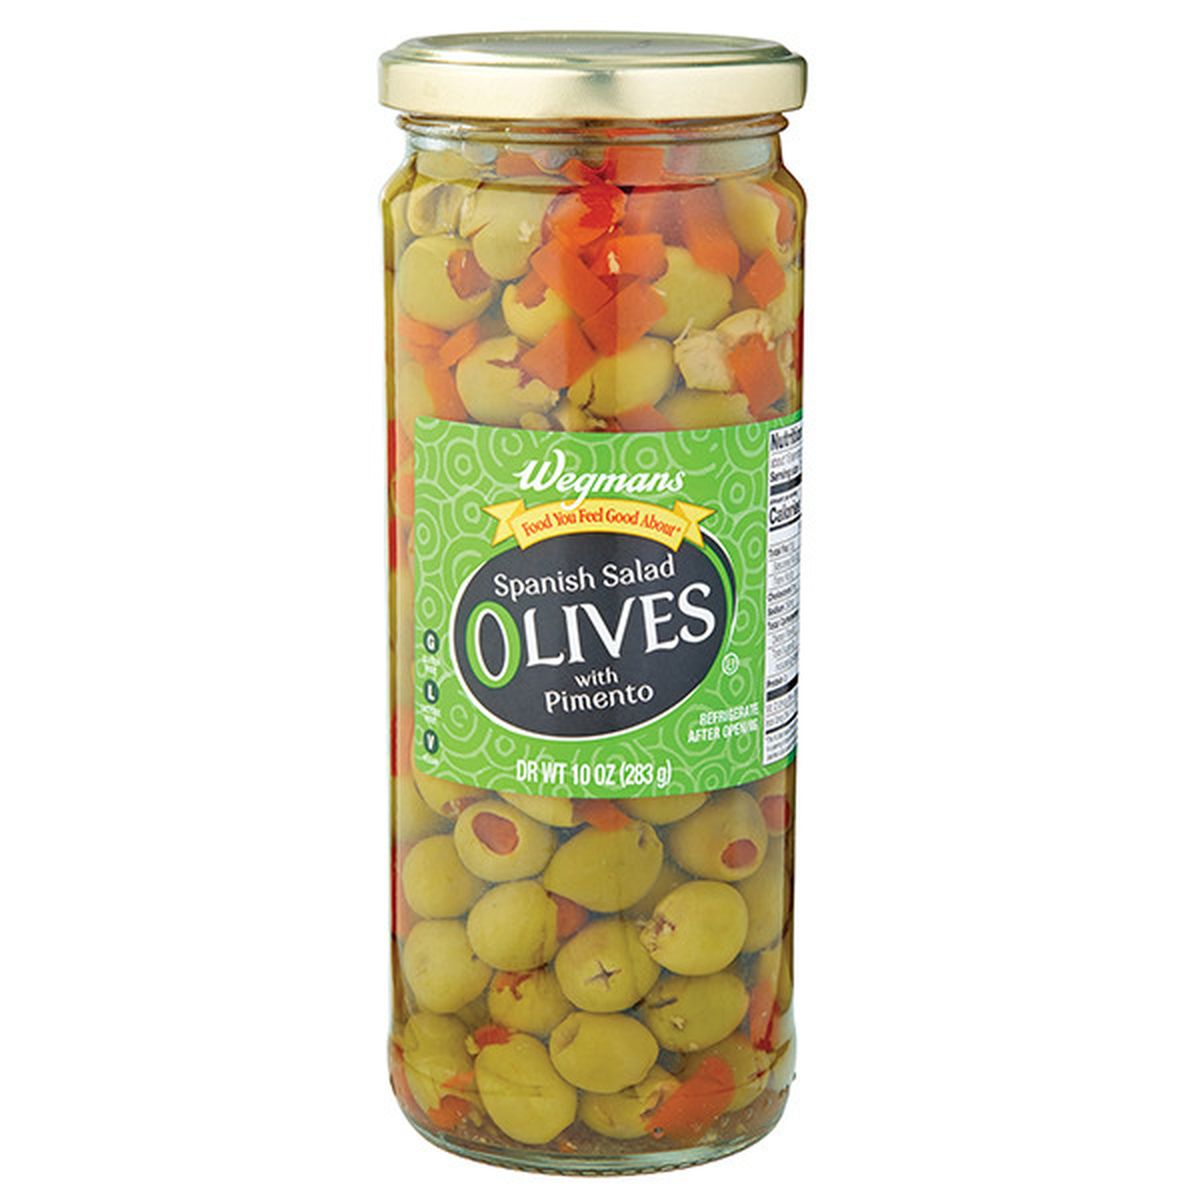 Calories in Wegmans Spanish Salad Olives with Pimento